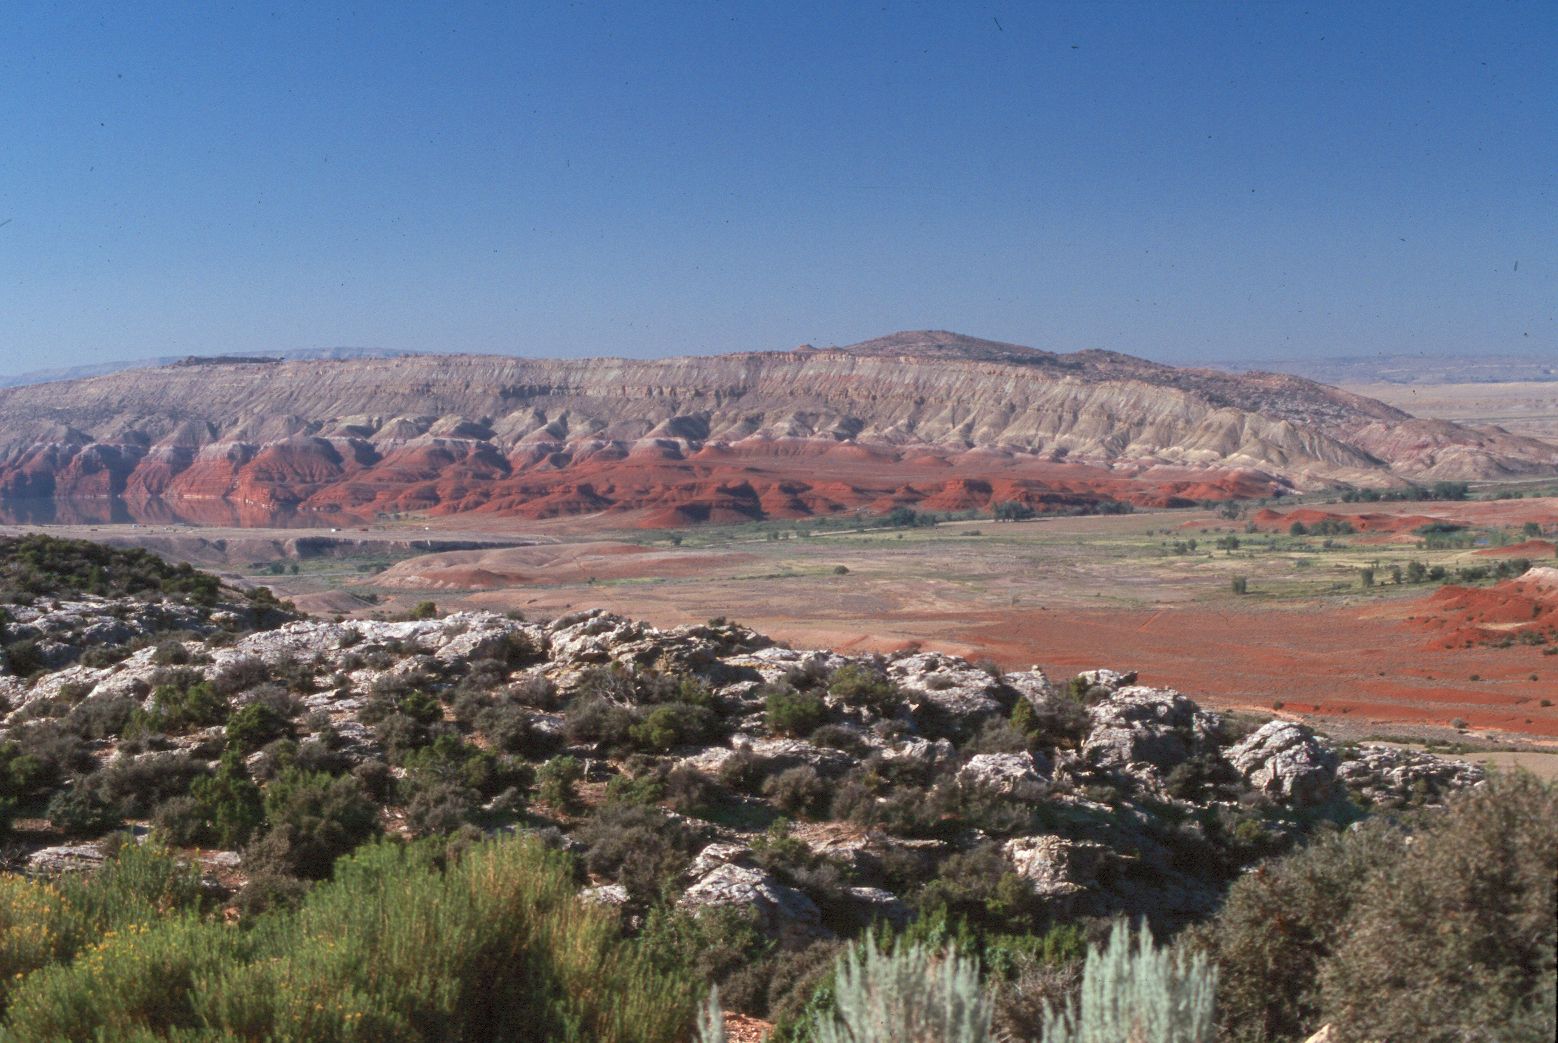 Great Basin Desert picture showing vegetation and mountains